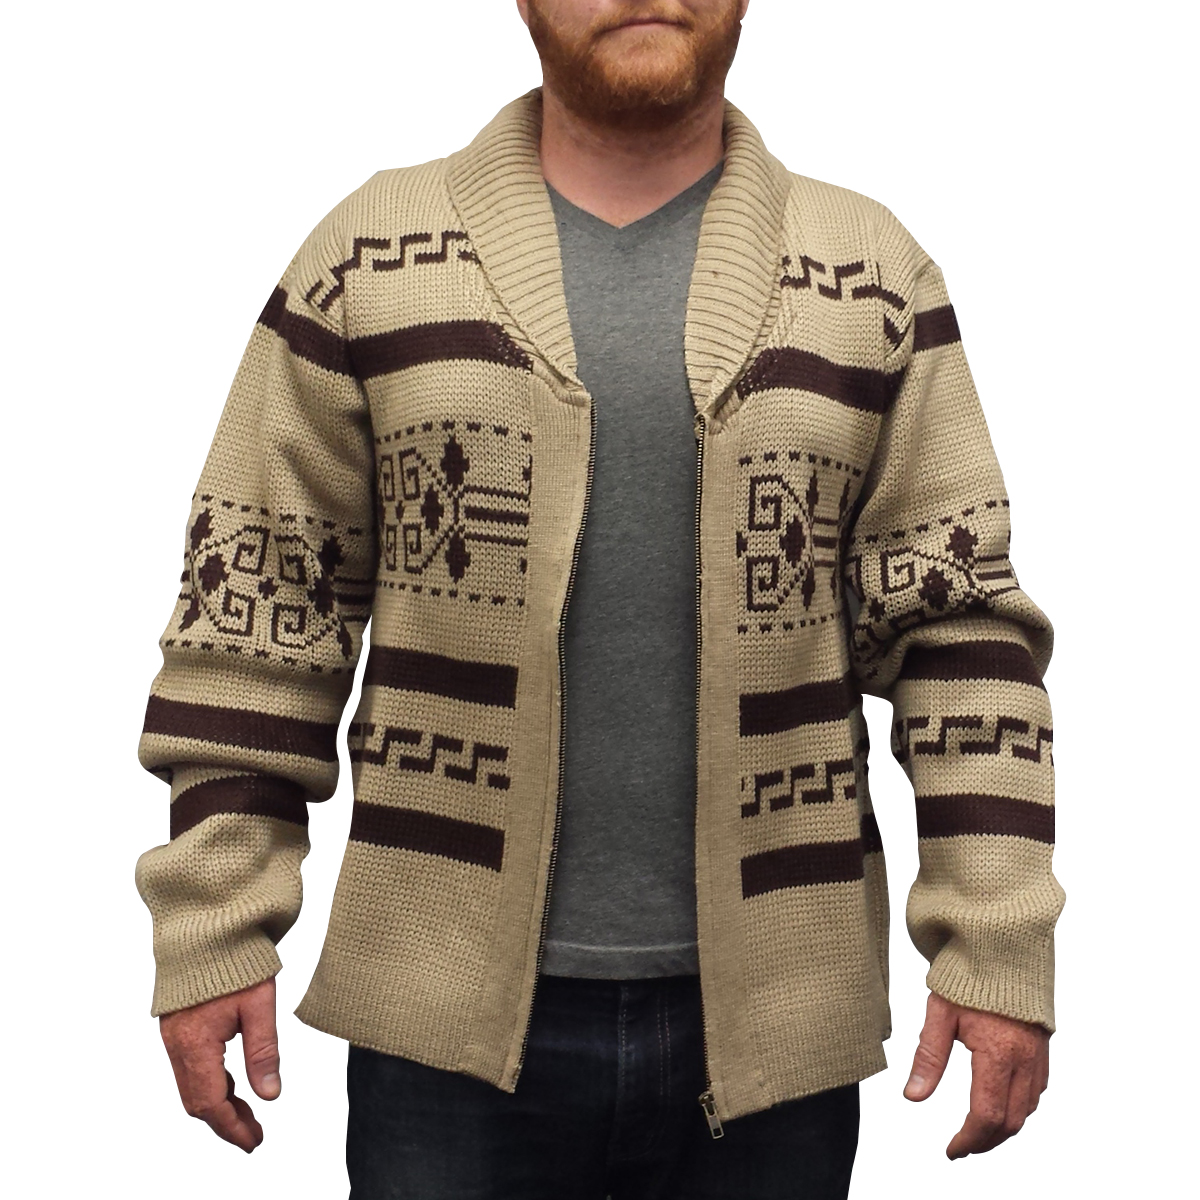 Unisex Big Lebowski Sweater for Men Zip Up Knitted Sweater for Halloween Cosplay Costume Shawl Cardigan